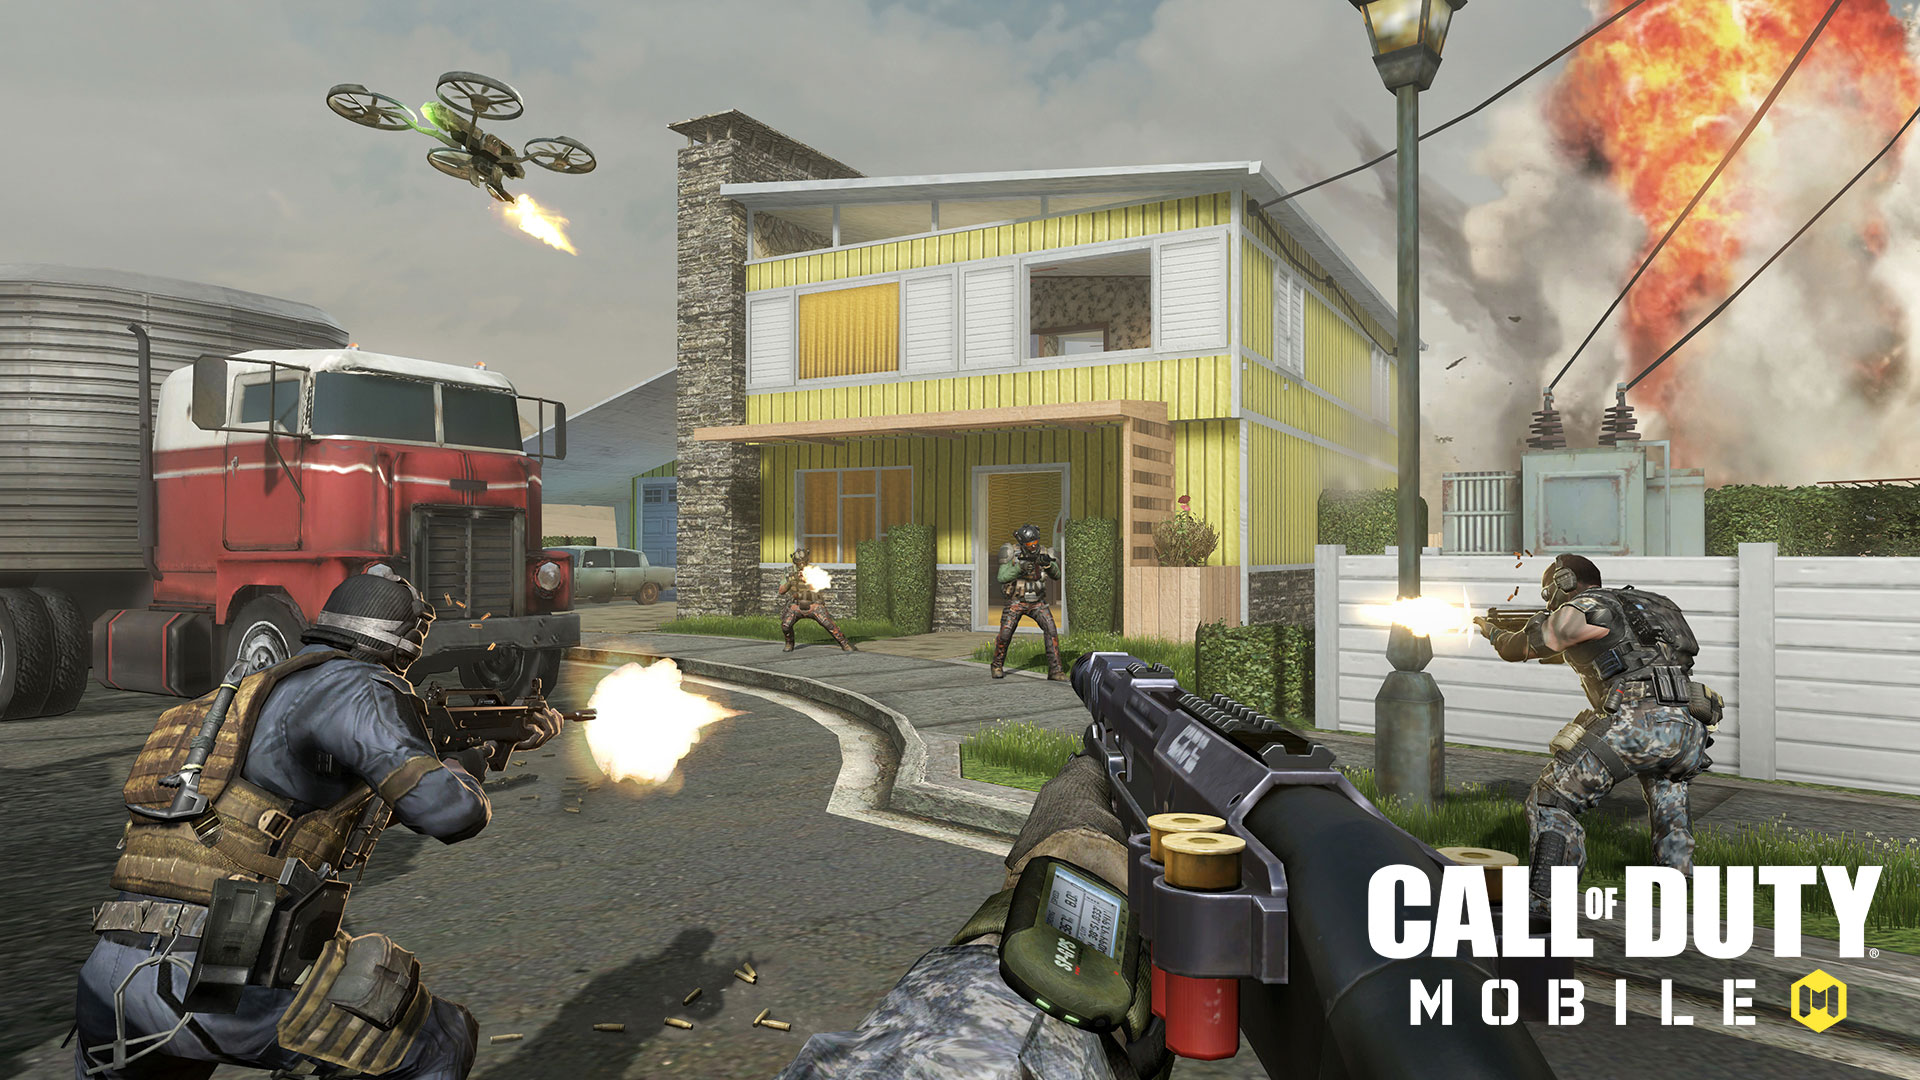 Call of duty Mobile updates featured image